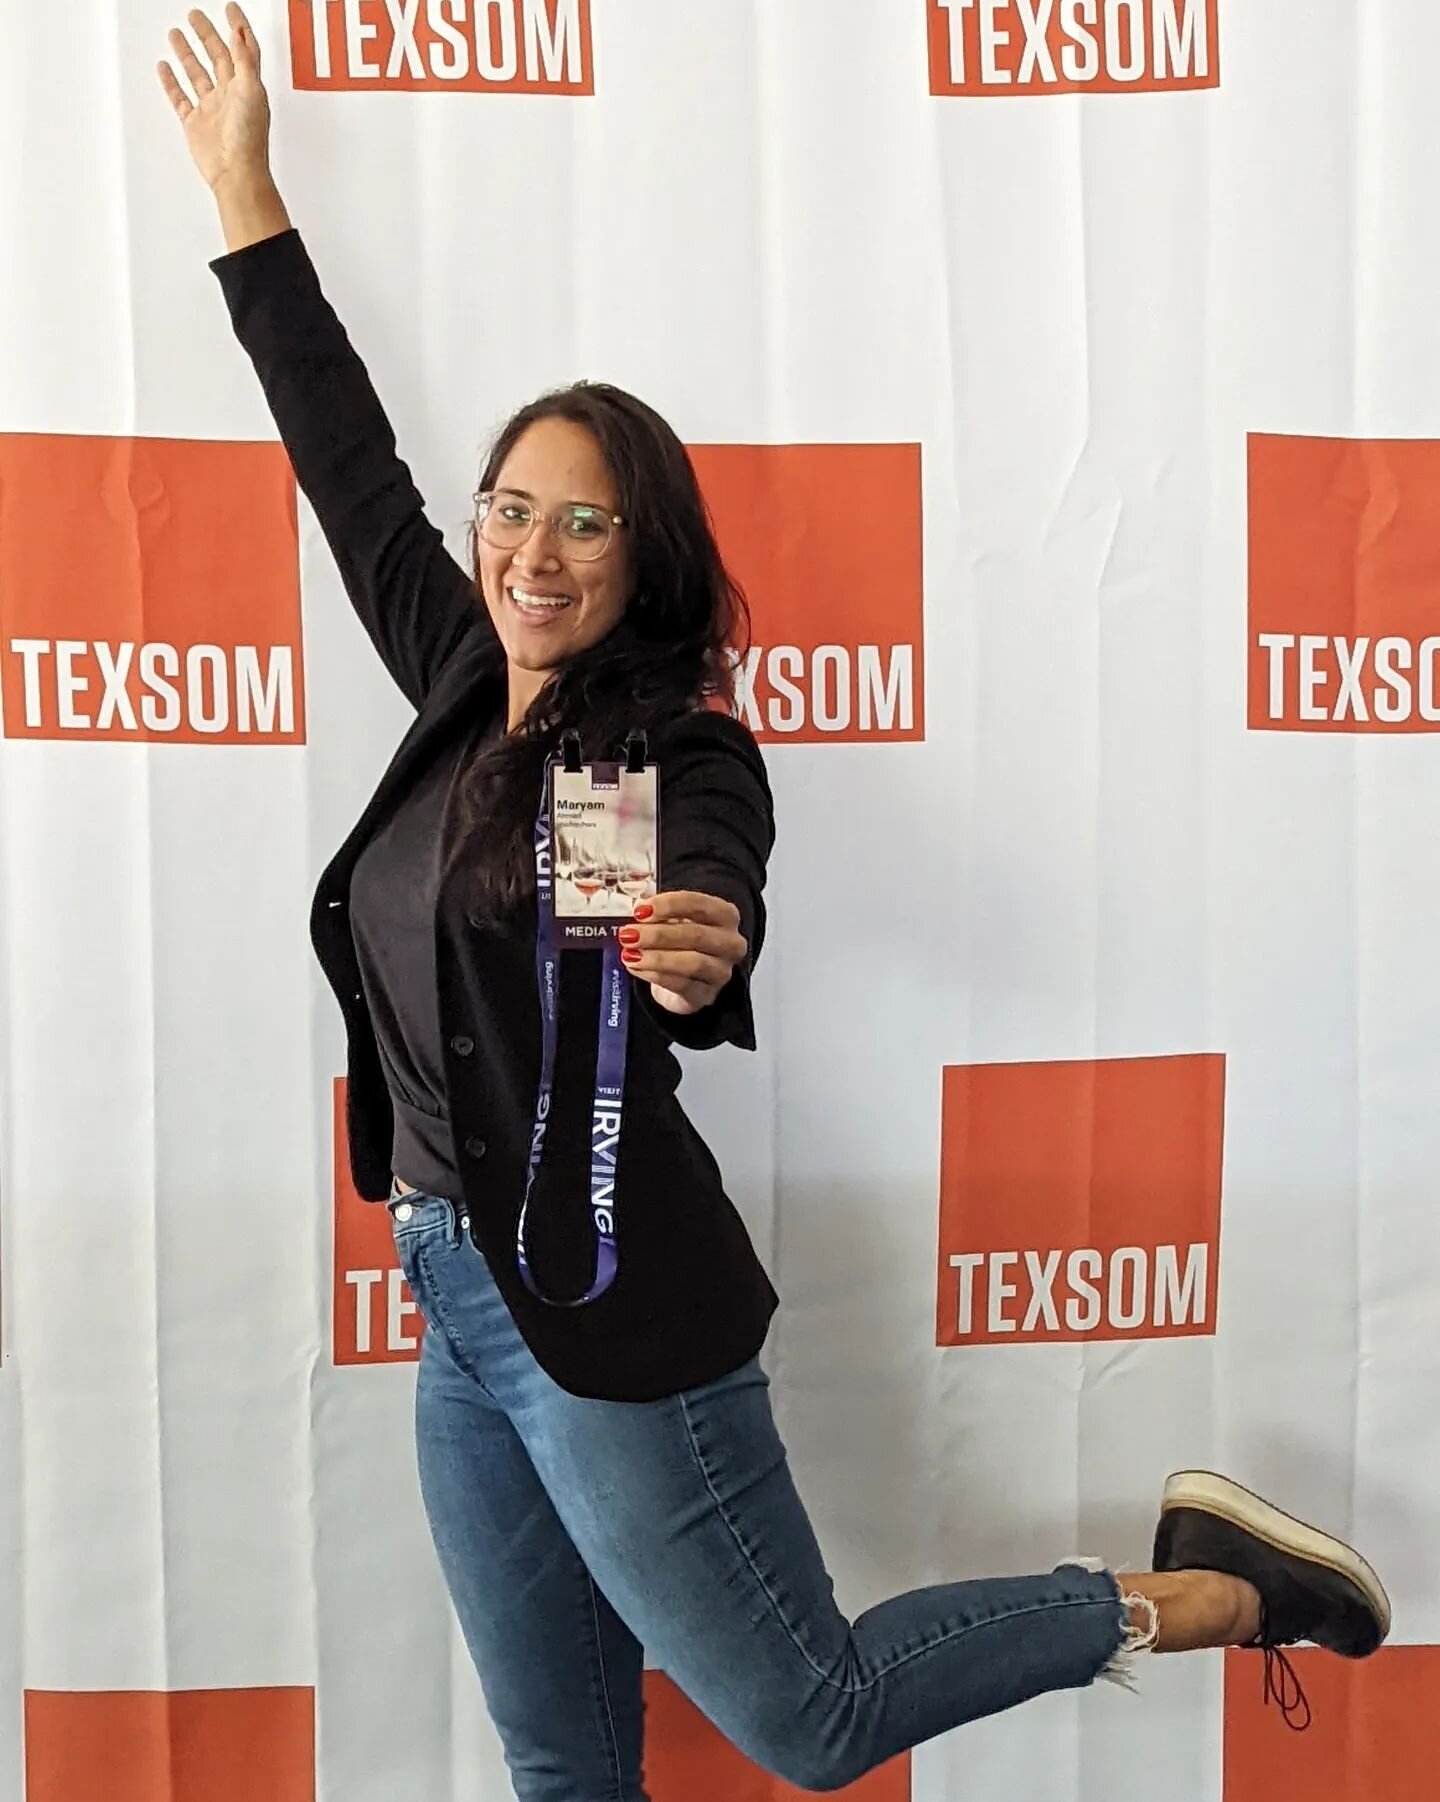 First time at @texsom conference after leading an accountability and ethics workshop at the @texsomiwa Retreat in May with @hawk_wakawaka. Being on the conference media team is a chance to see everything come full circle. Not to mention reconnect wit